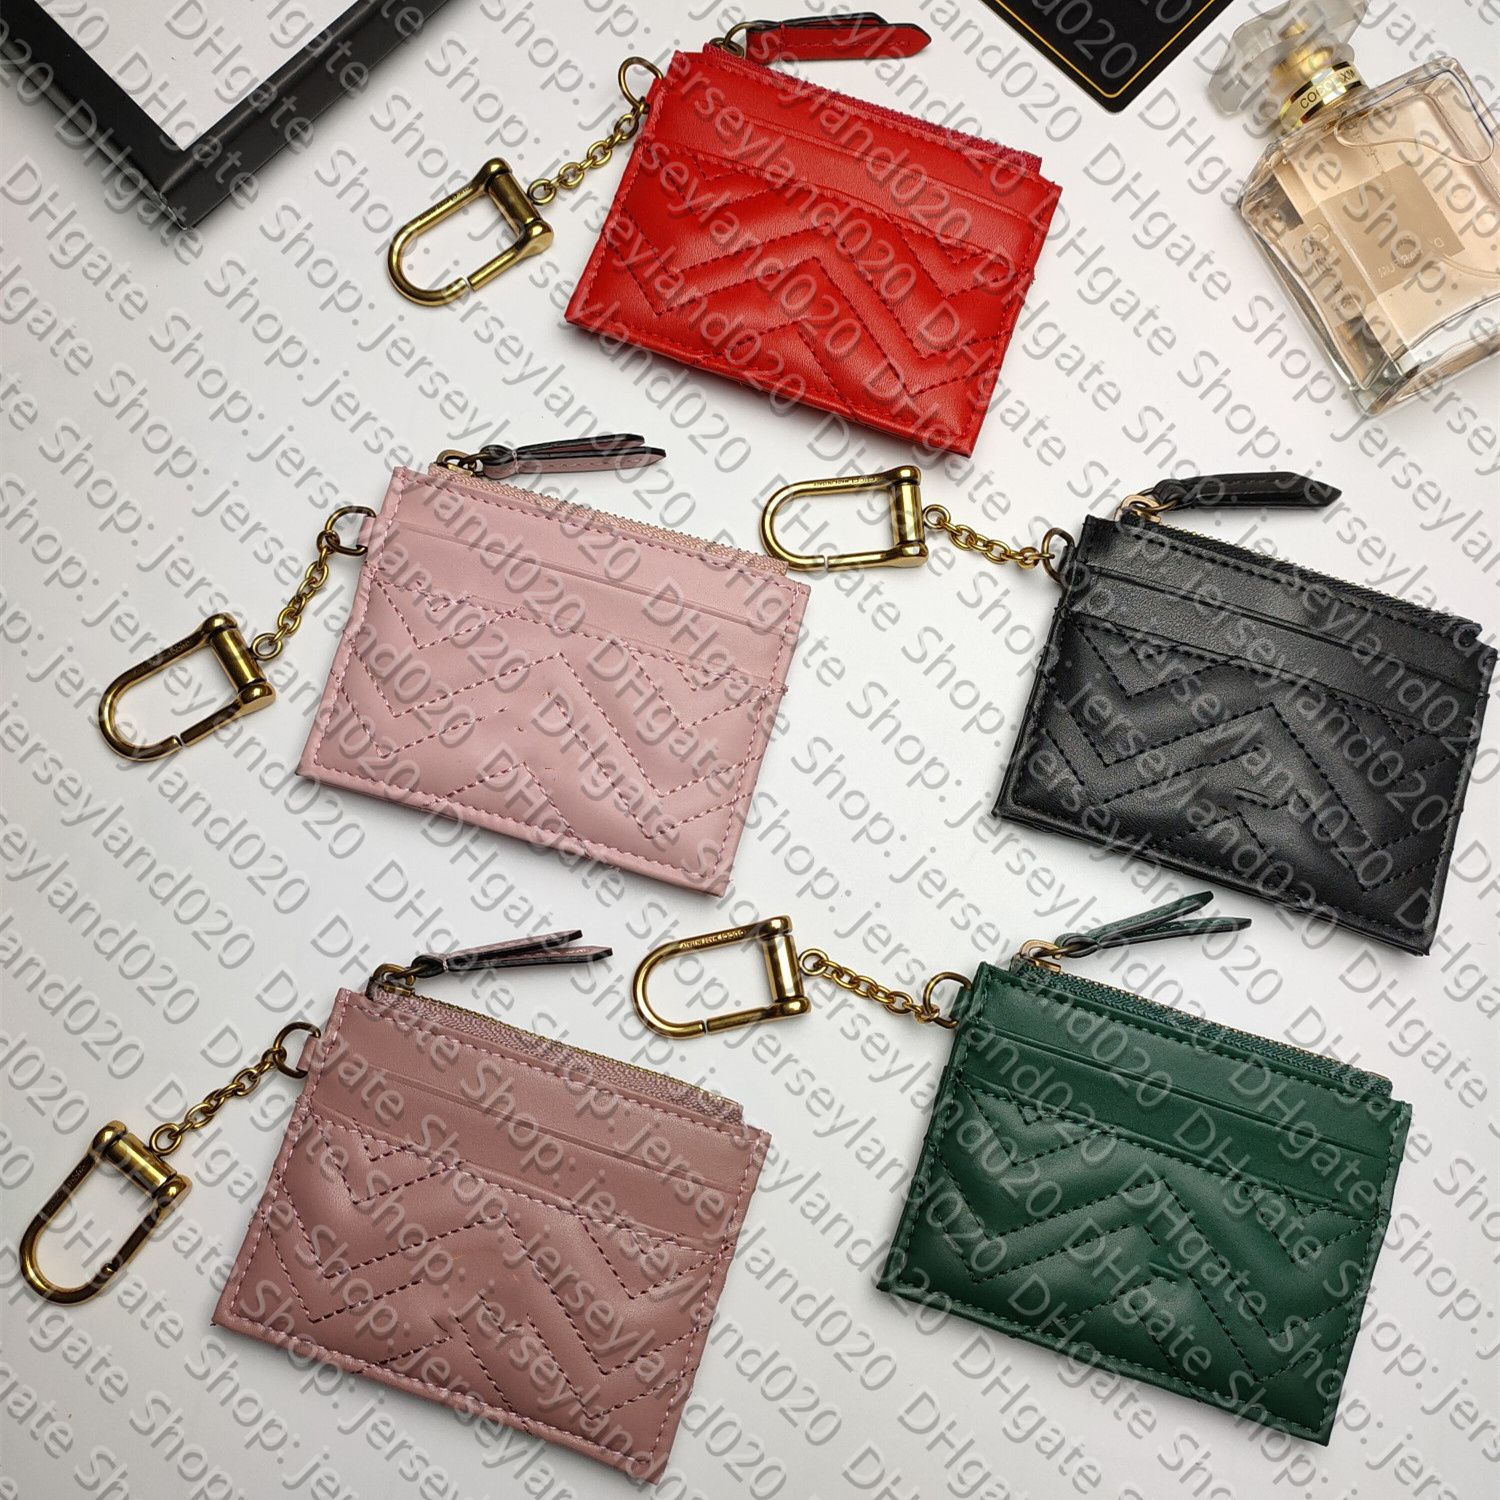 627064 Marmont Keychain Wallet Designer Womens Slim Zipped Coin Purse Key  Pouch Pochette Cle Card Holder Case Bag Charm Accessoires From  Jerseyland020, $22.84